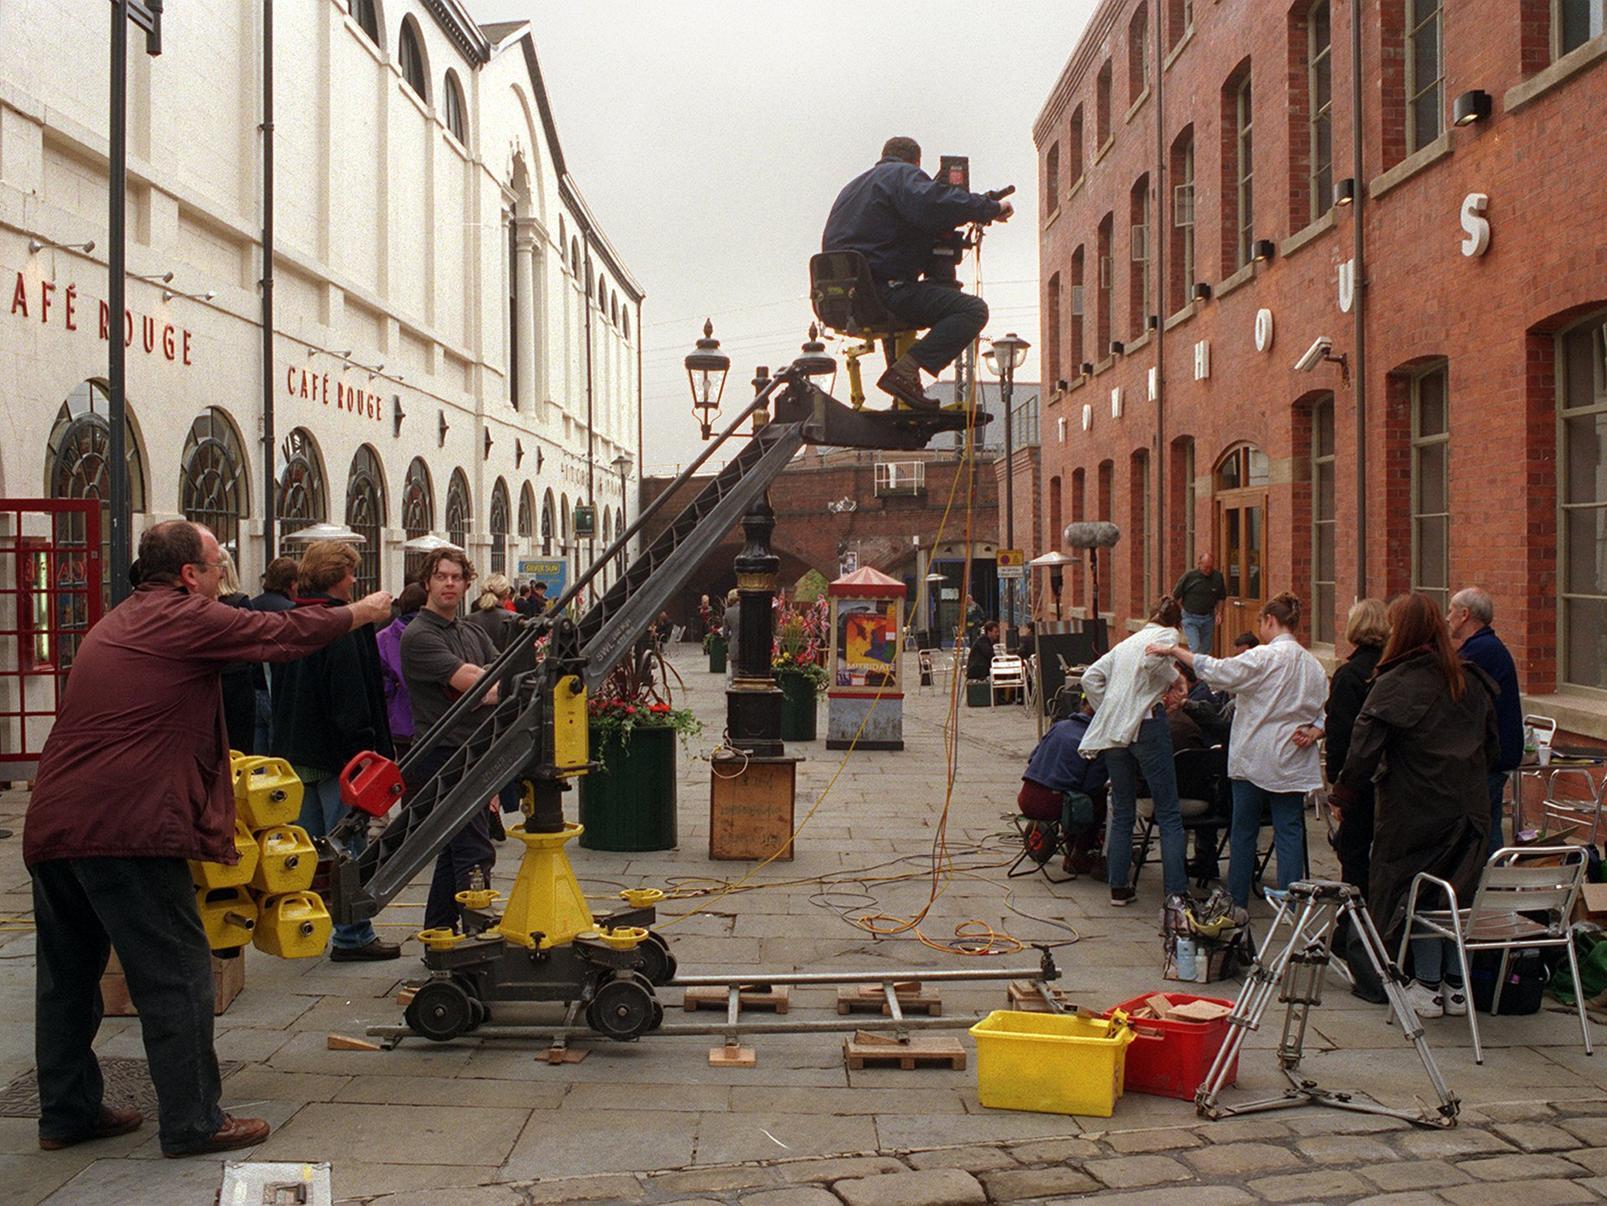 We step outside for this photo on Assembly Street at the rear of the Corn Exchange, which was transformed as Emmerdale filmed some scenes.